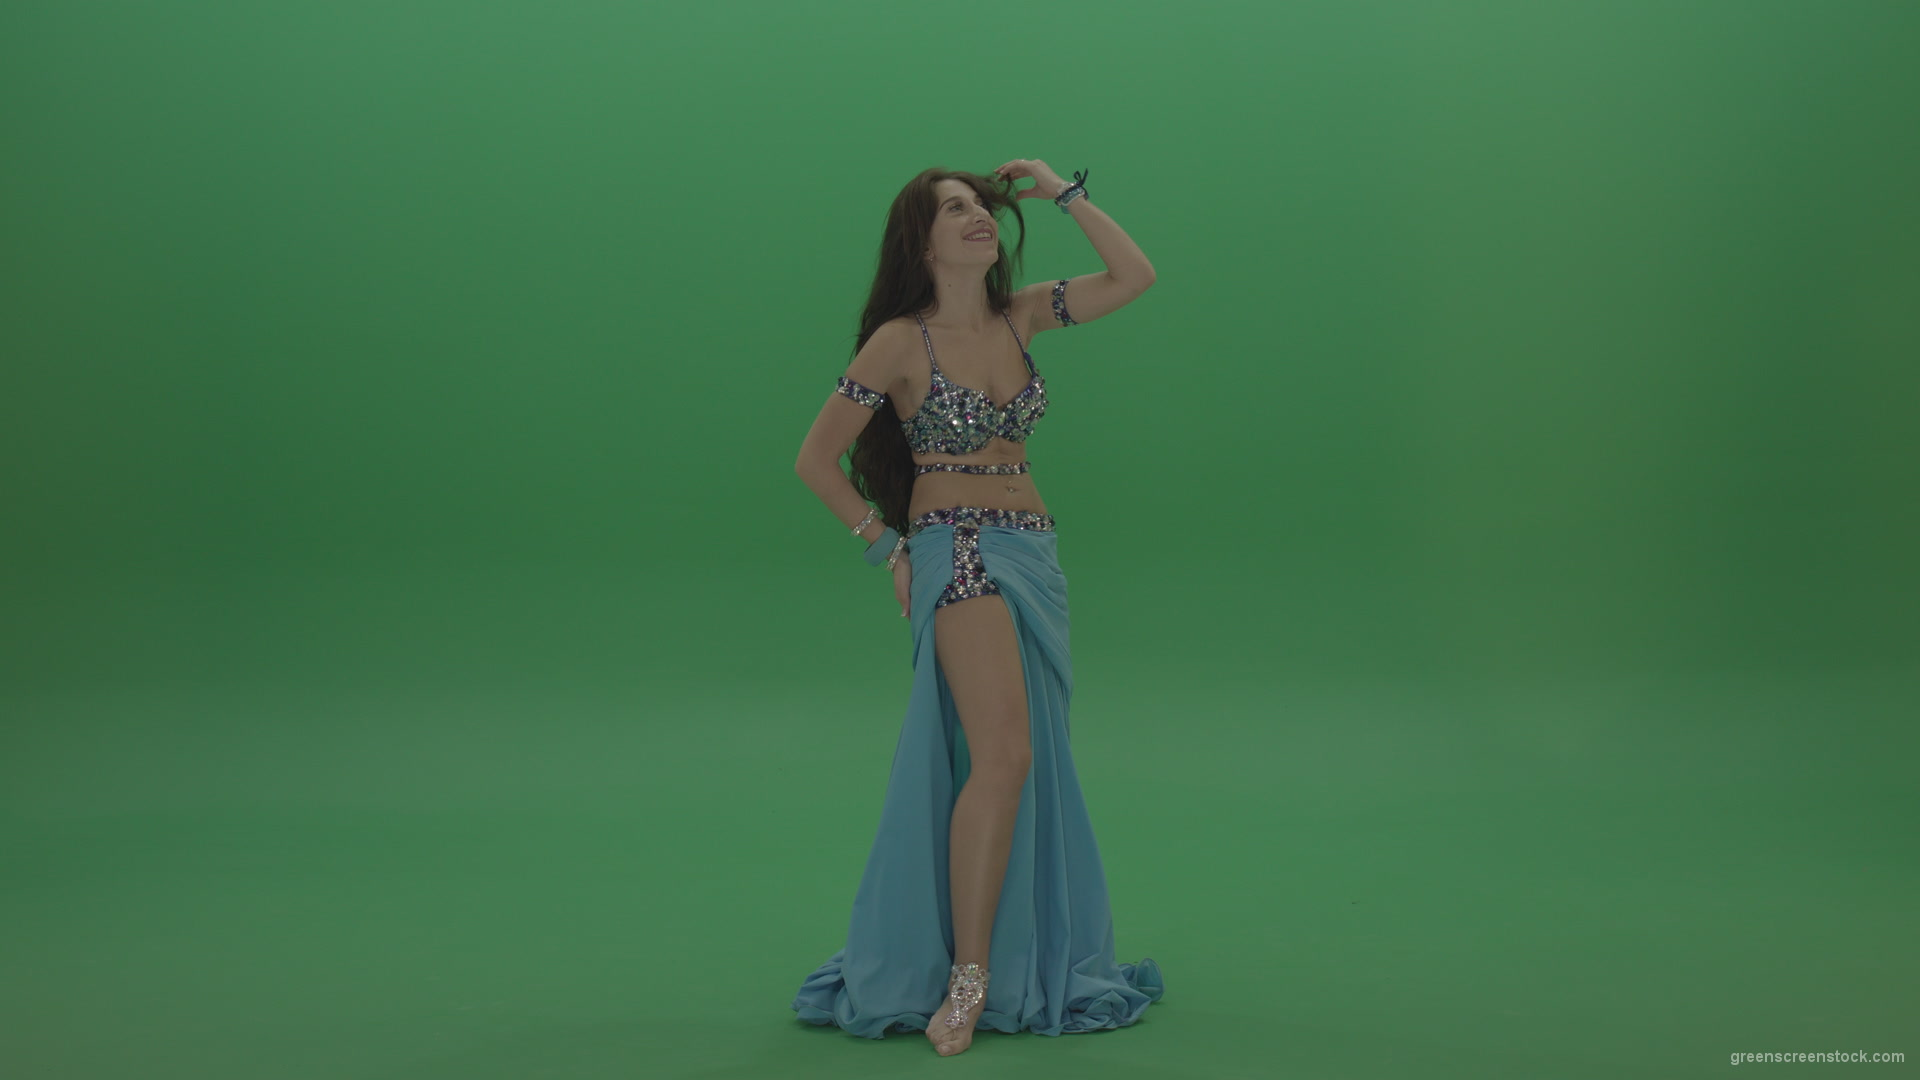 Awesome-belly-dancer-in-blue-wear-display-amazing-dance-moves-over-chromakey-background_009 Green Screen Stock